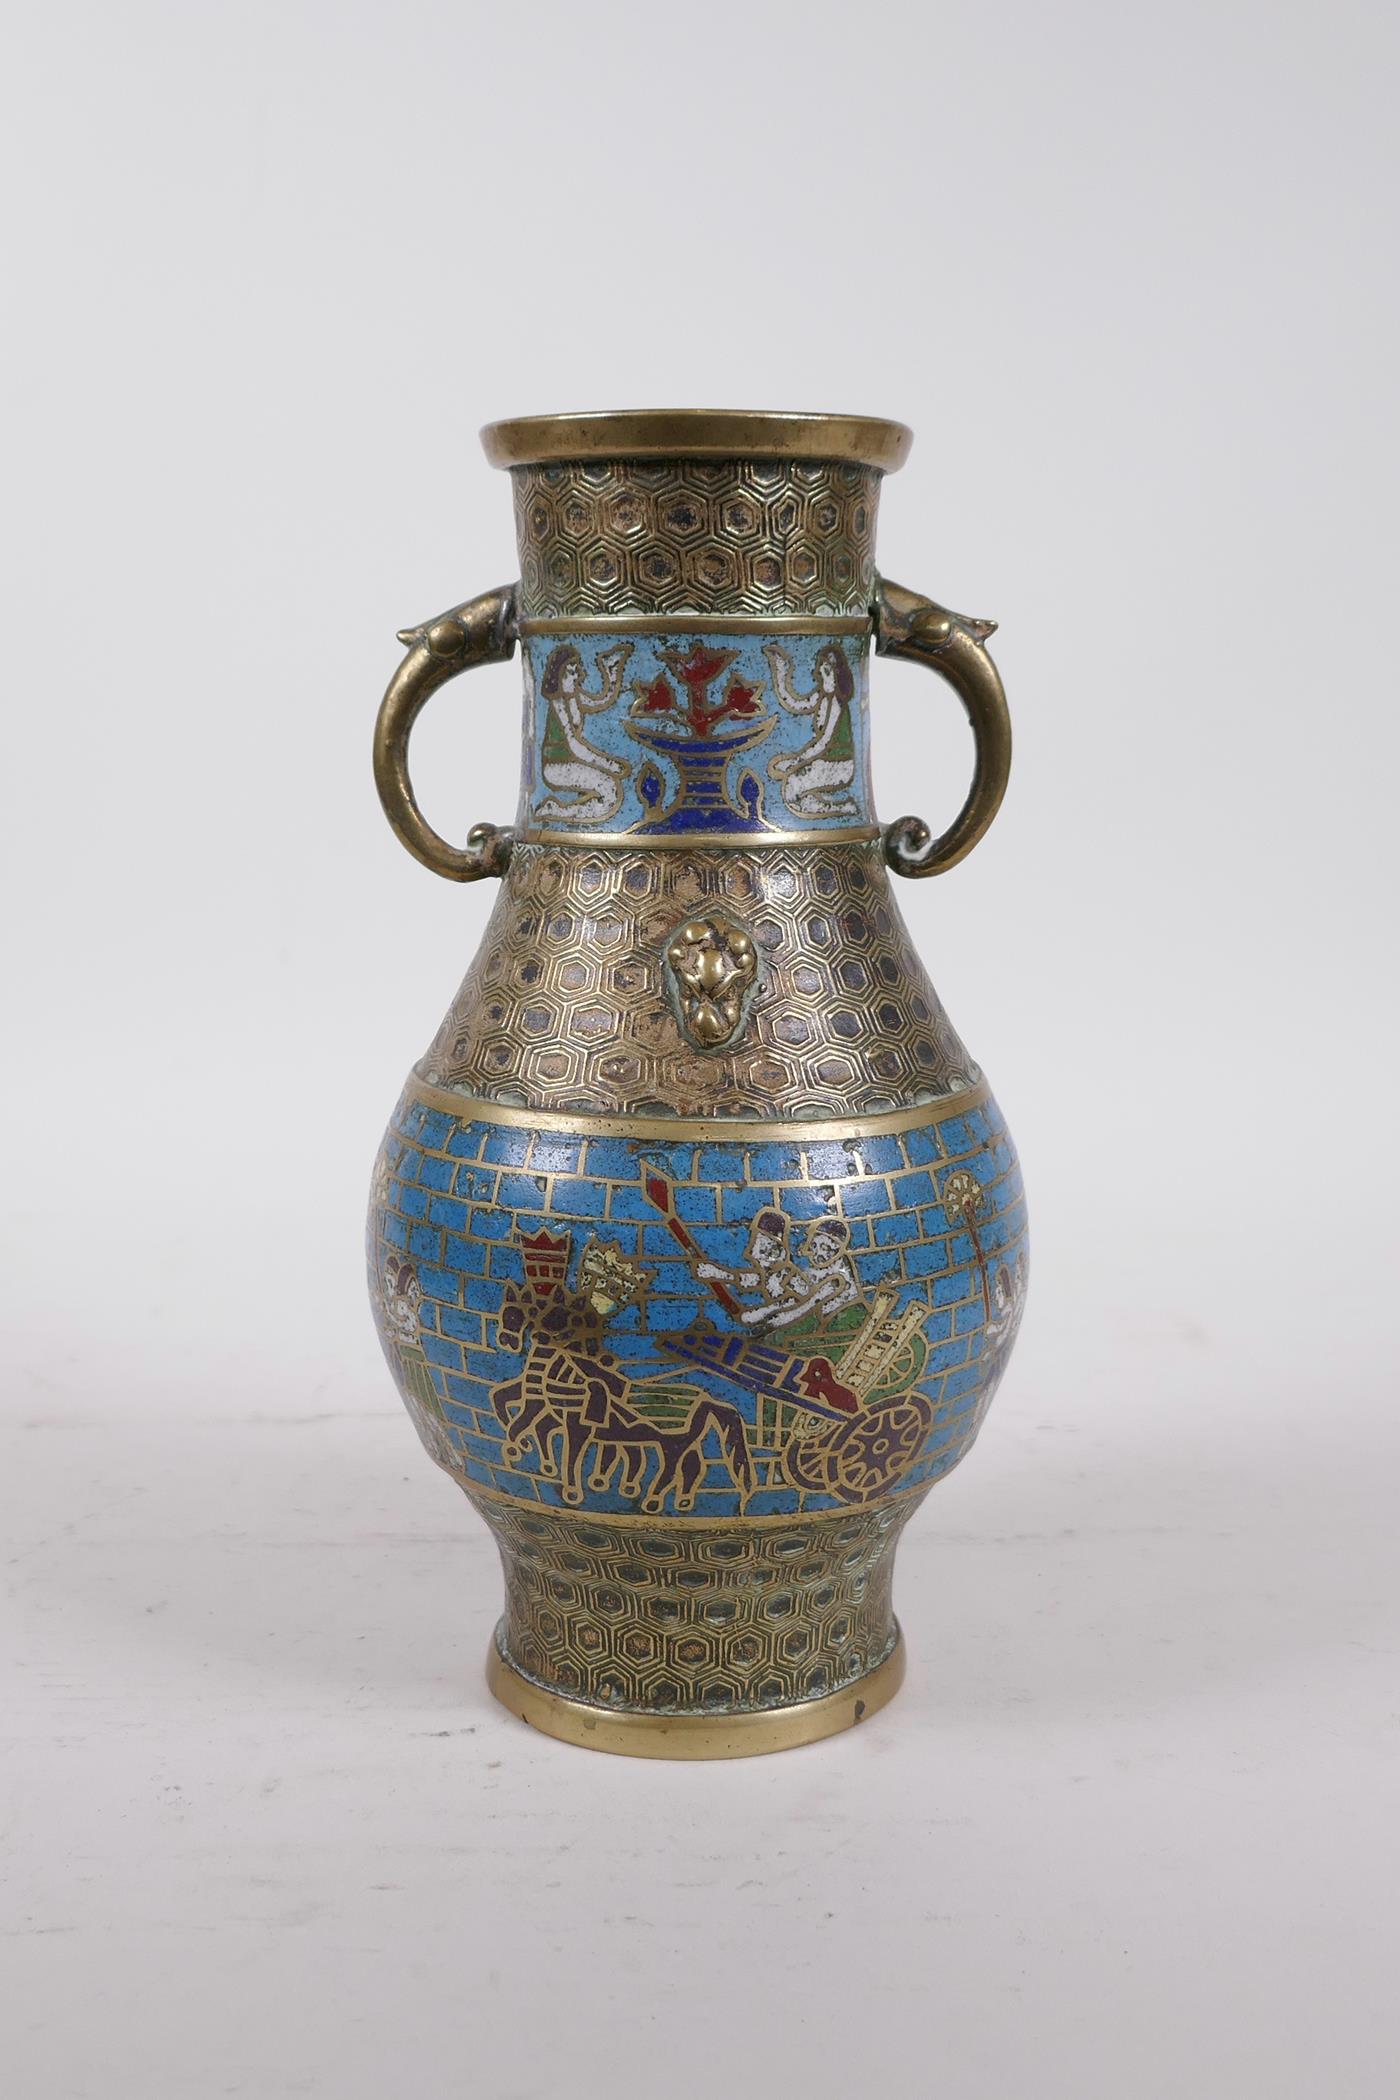 An Eastern bronze cloisonne two handled vase of Chinese form, the cloisonne bands with Egyptian